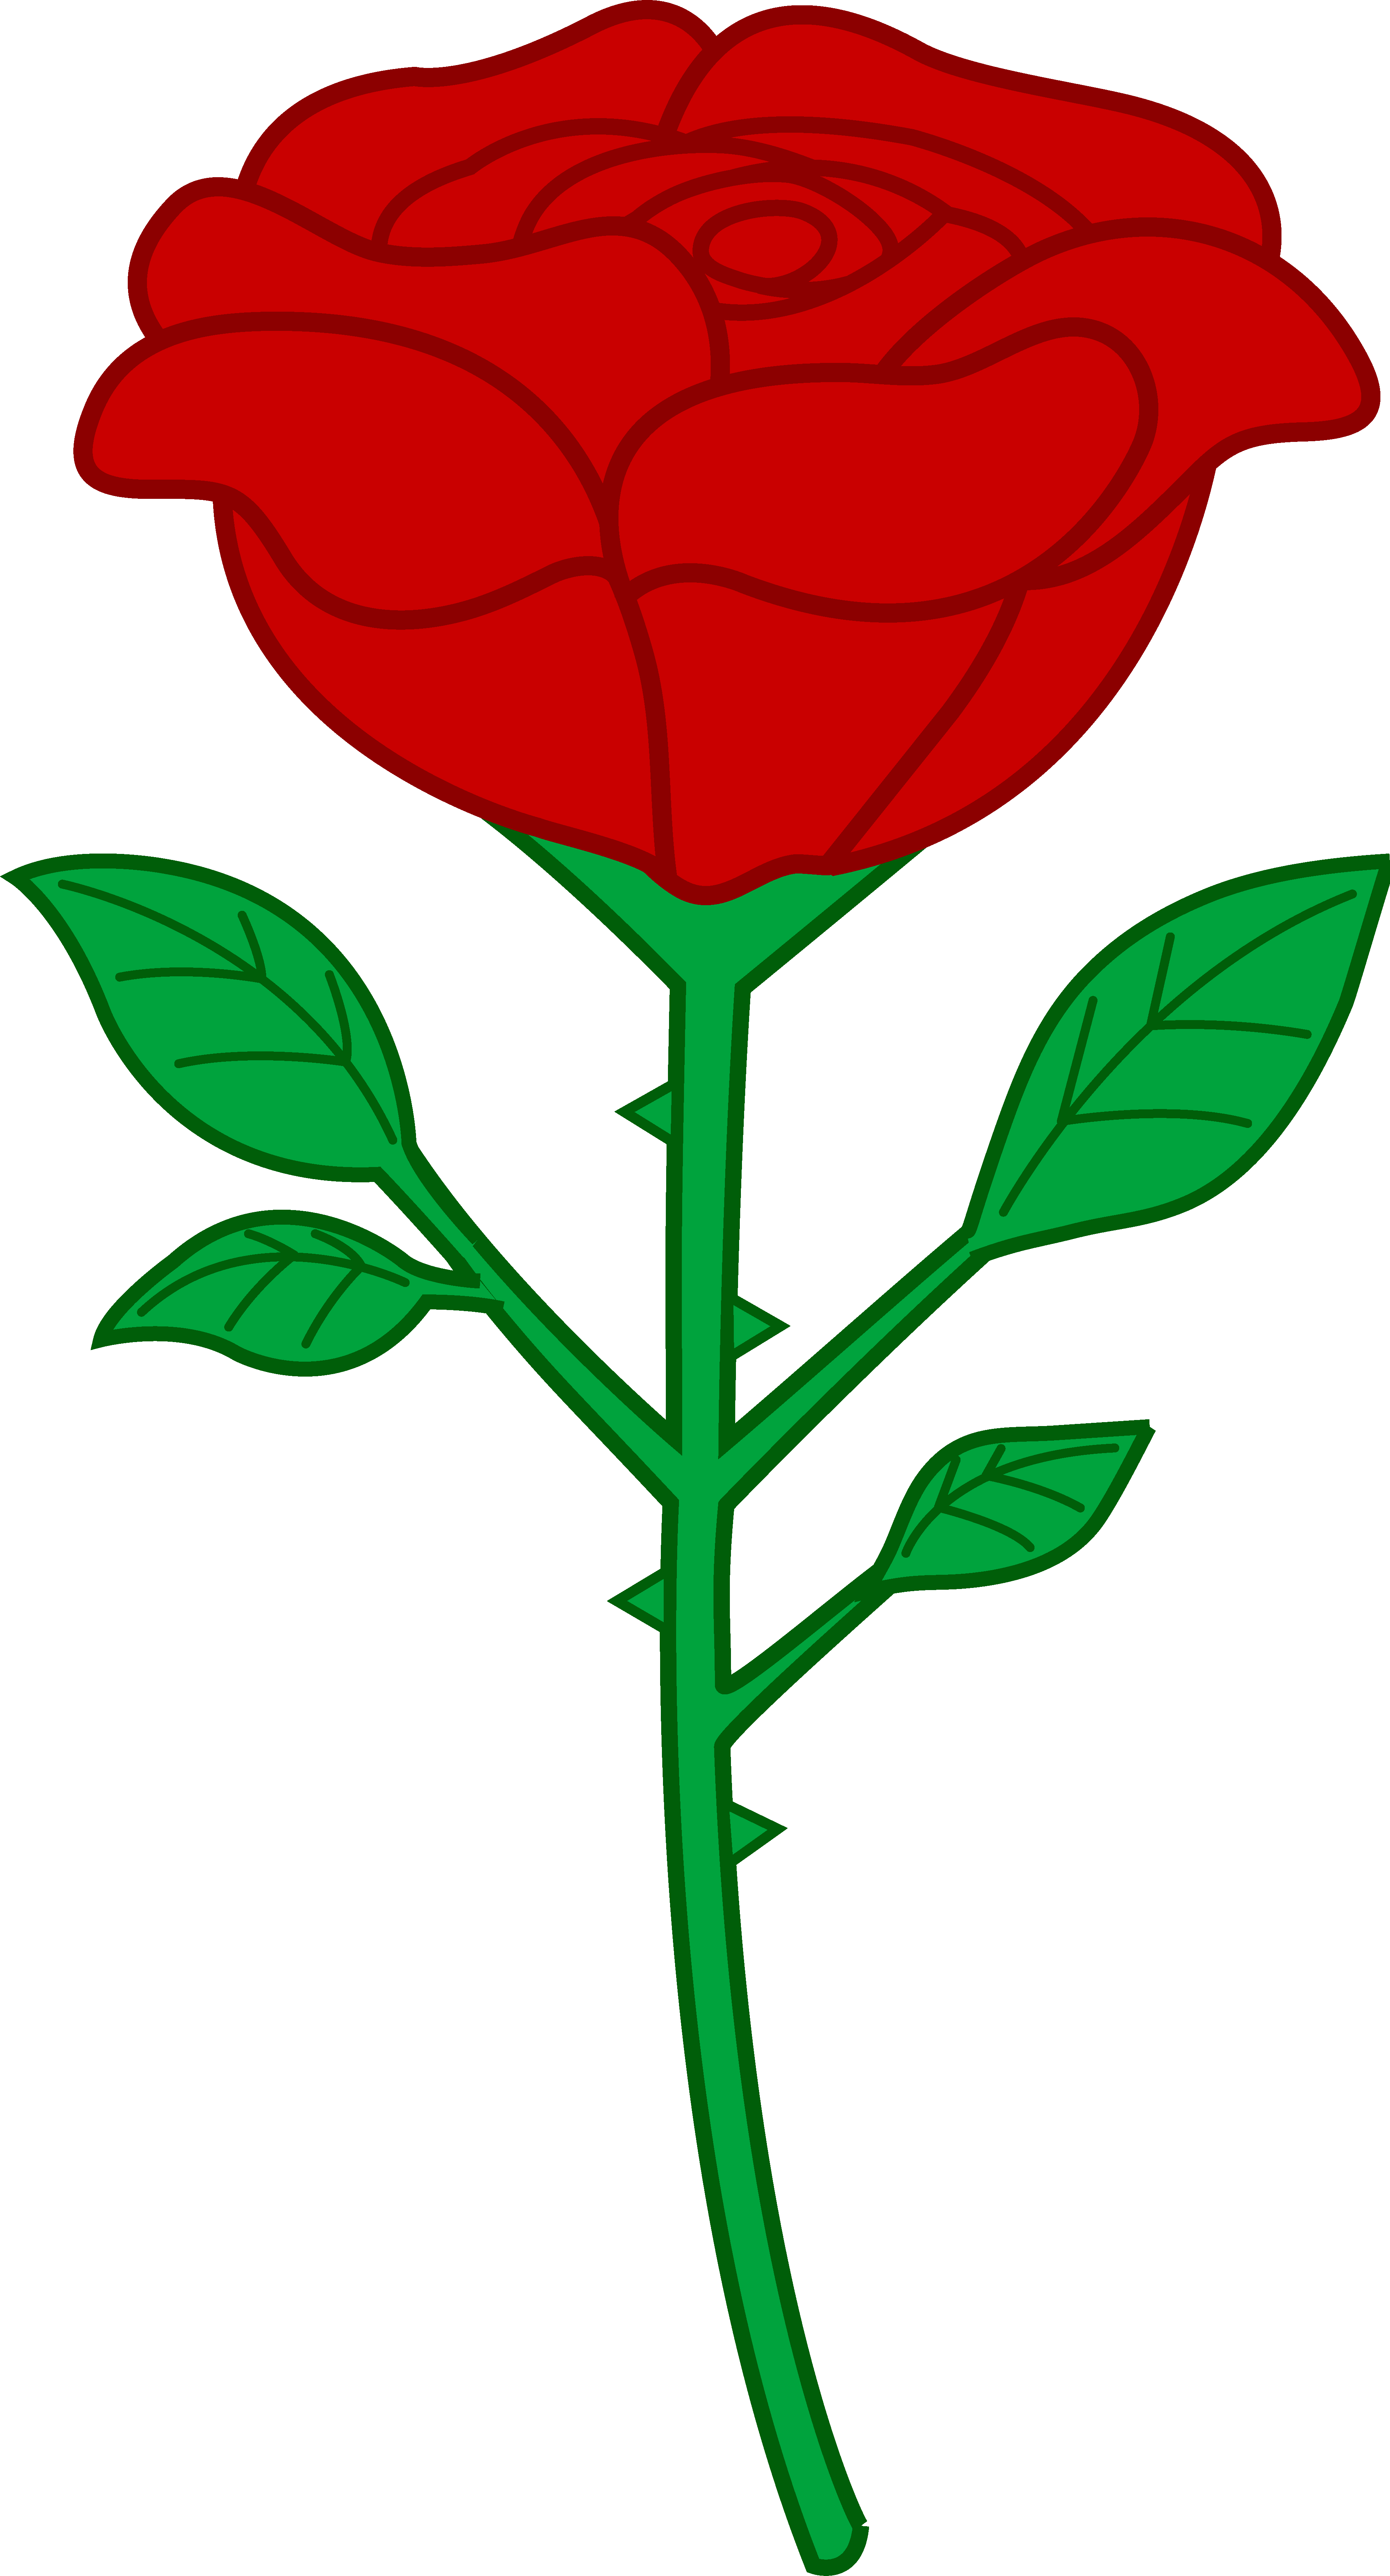 clipart chat rose - photo #27